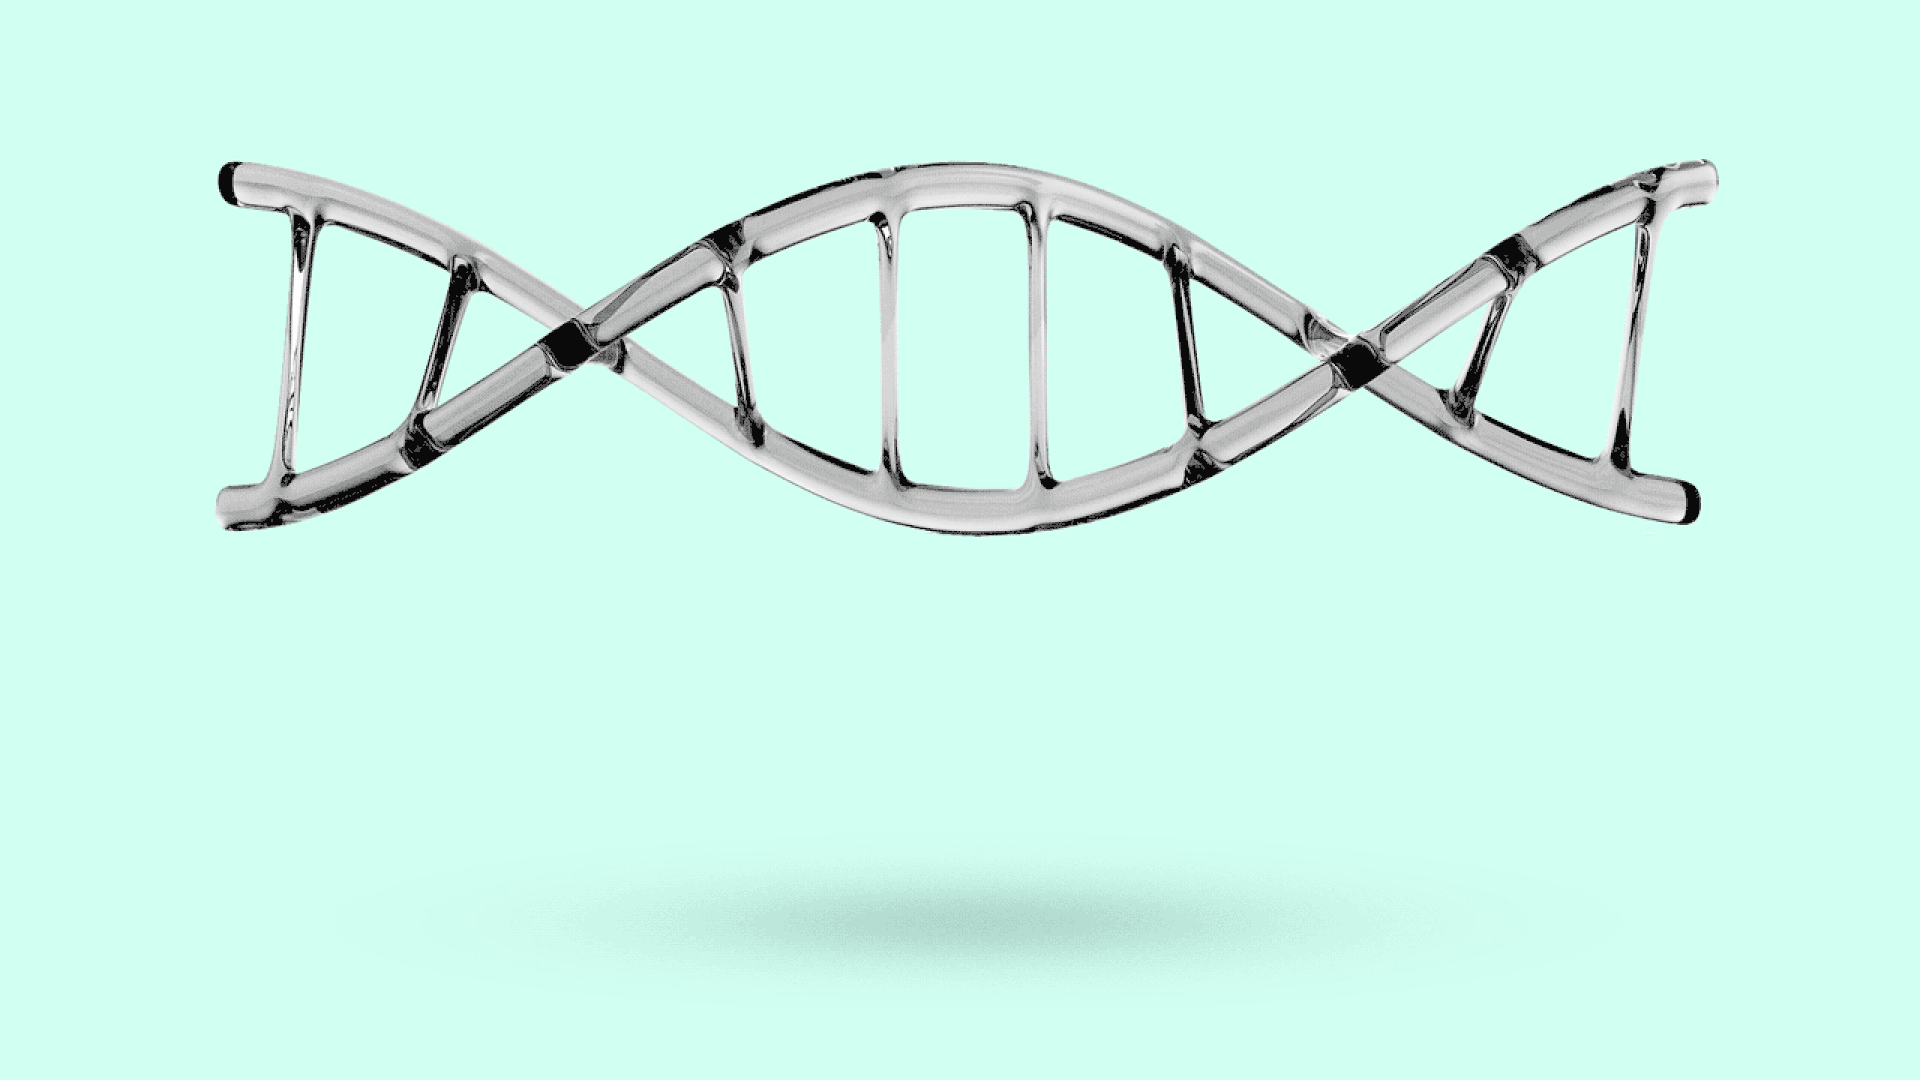 CRISPR gene therapy could advance using 